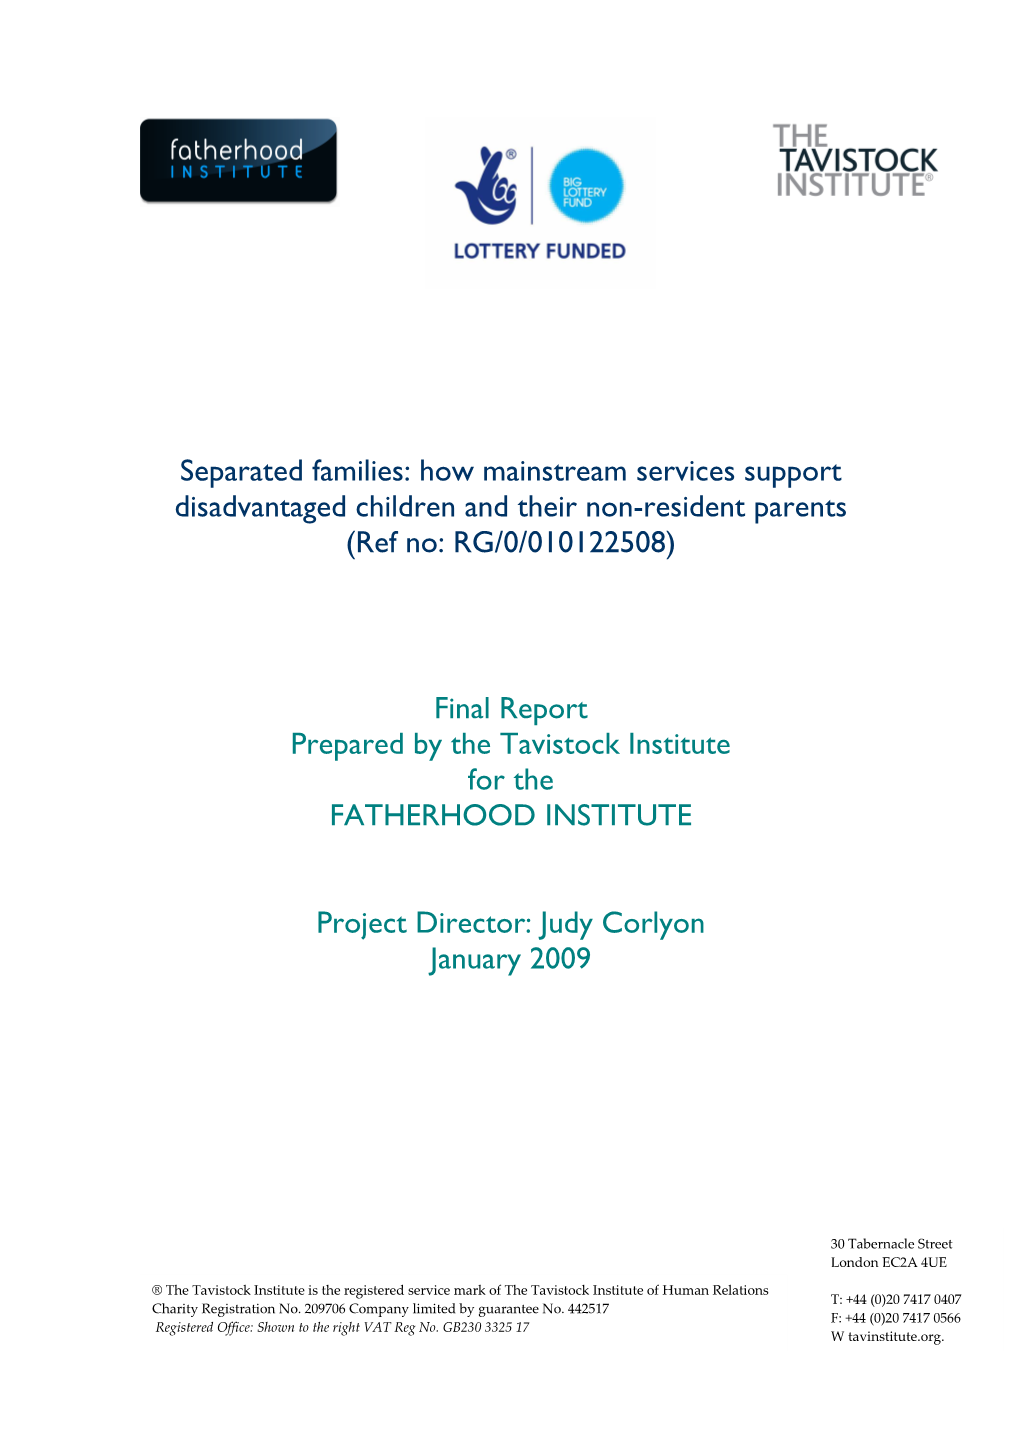 Report: Separated Families (2008)